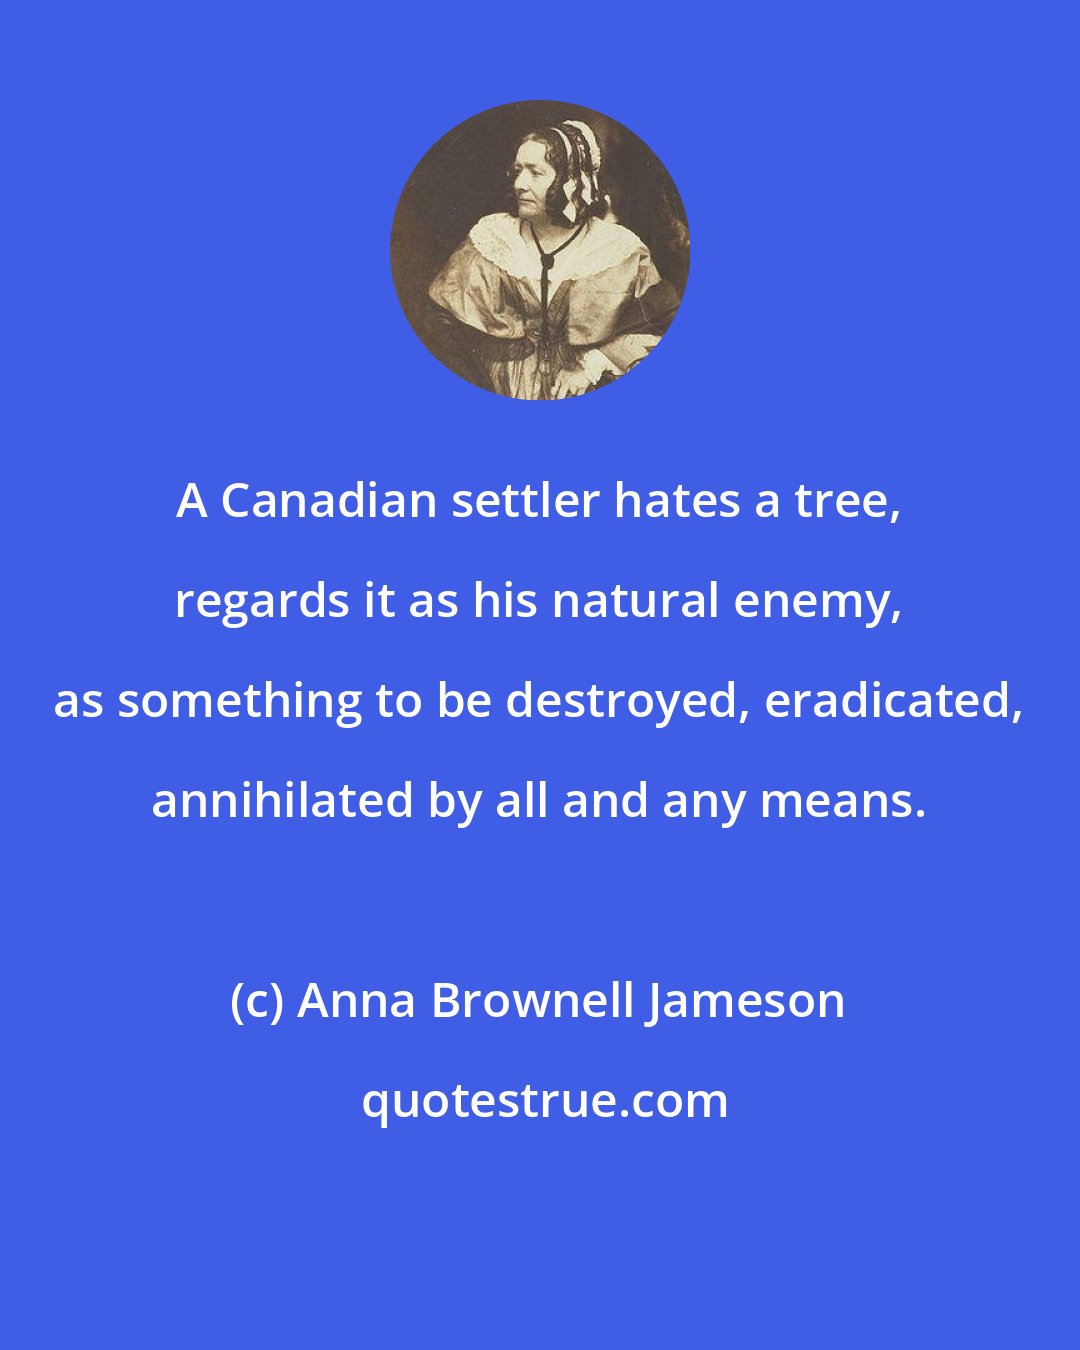 Anna Brownell Jameson: A Canadian settler hates a tree, regards it as his natural enemy, as something to be destroyed, eradicated, annihilated by all and any means.